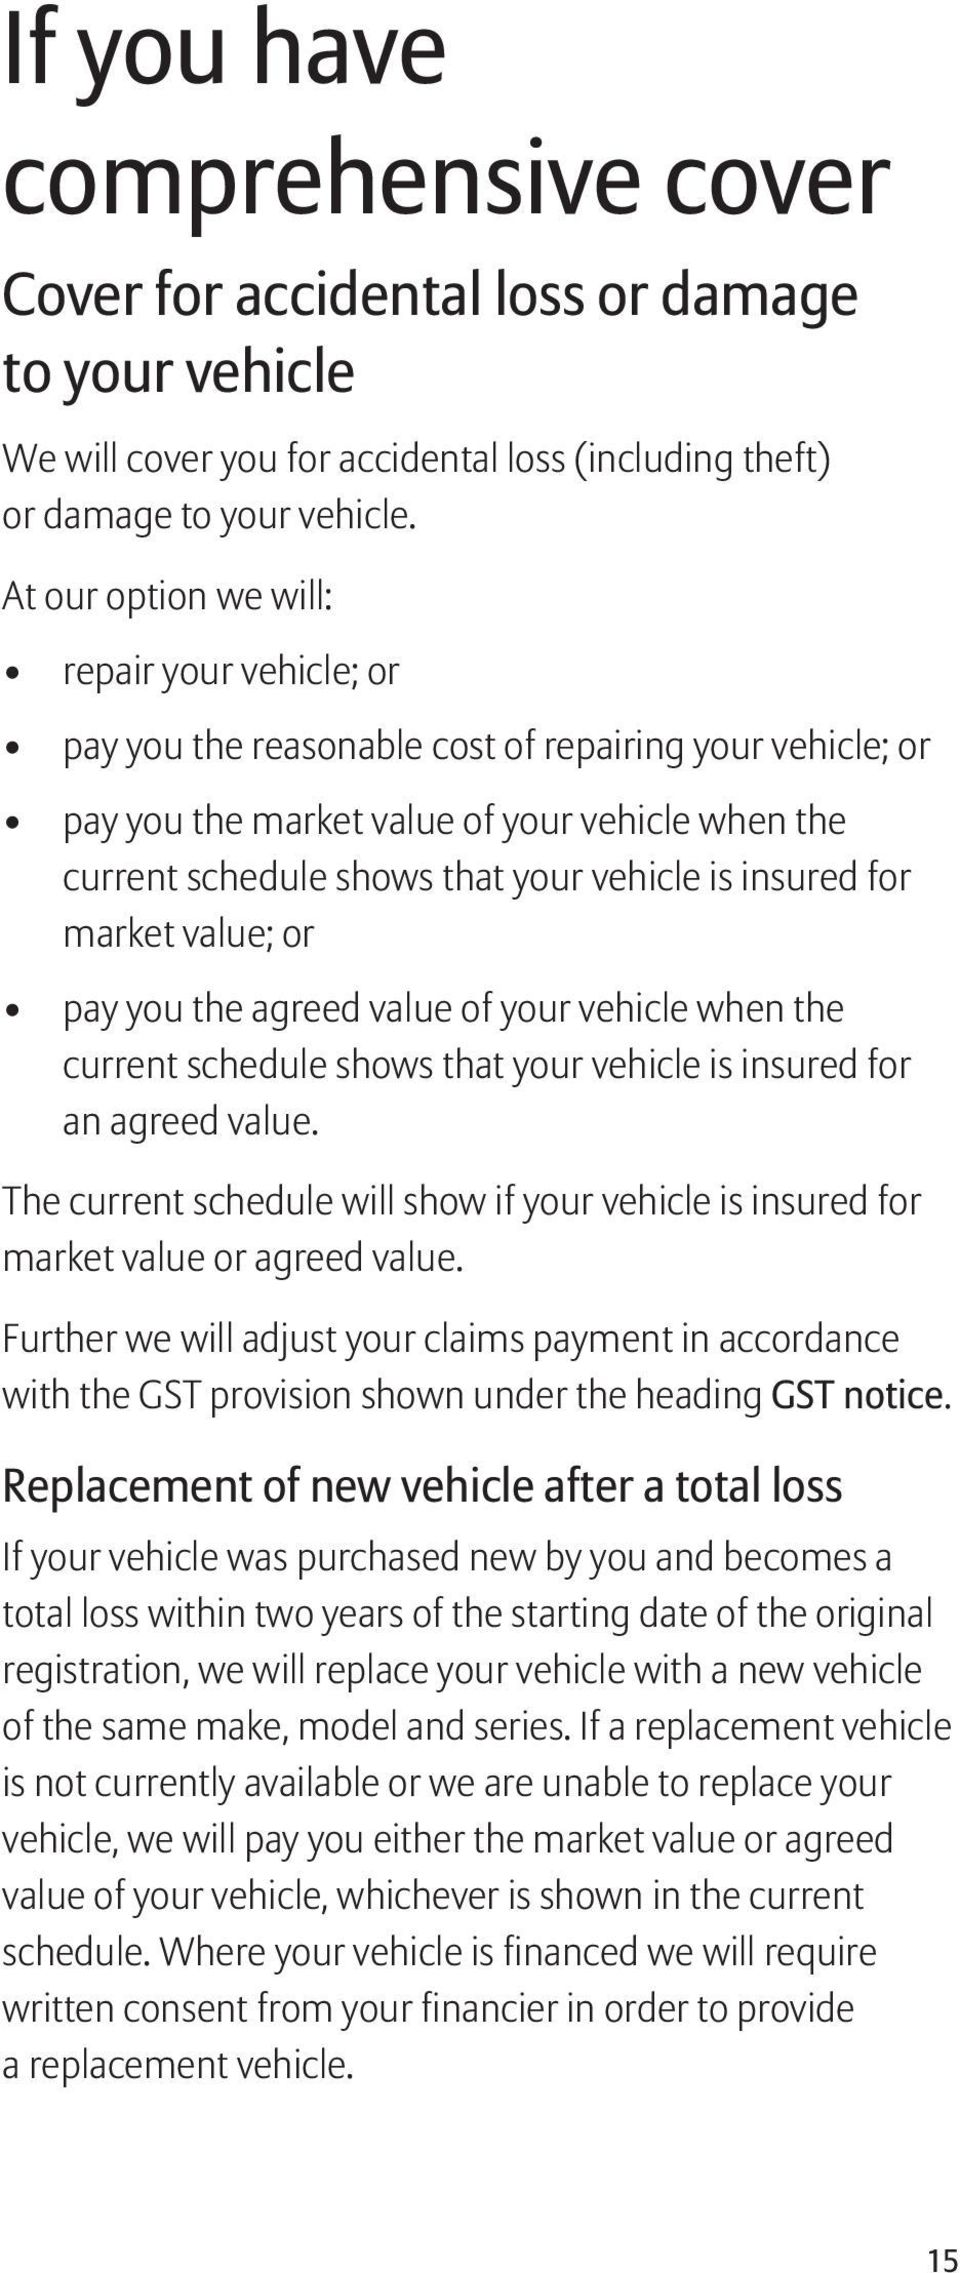 insured for market value; or pay you the agreed value of your vehicle when the current schedule shows that your vehicle is insured for an agreed value.